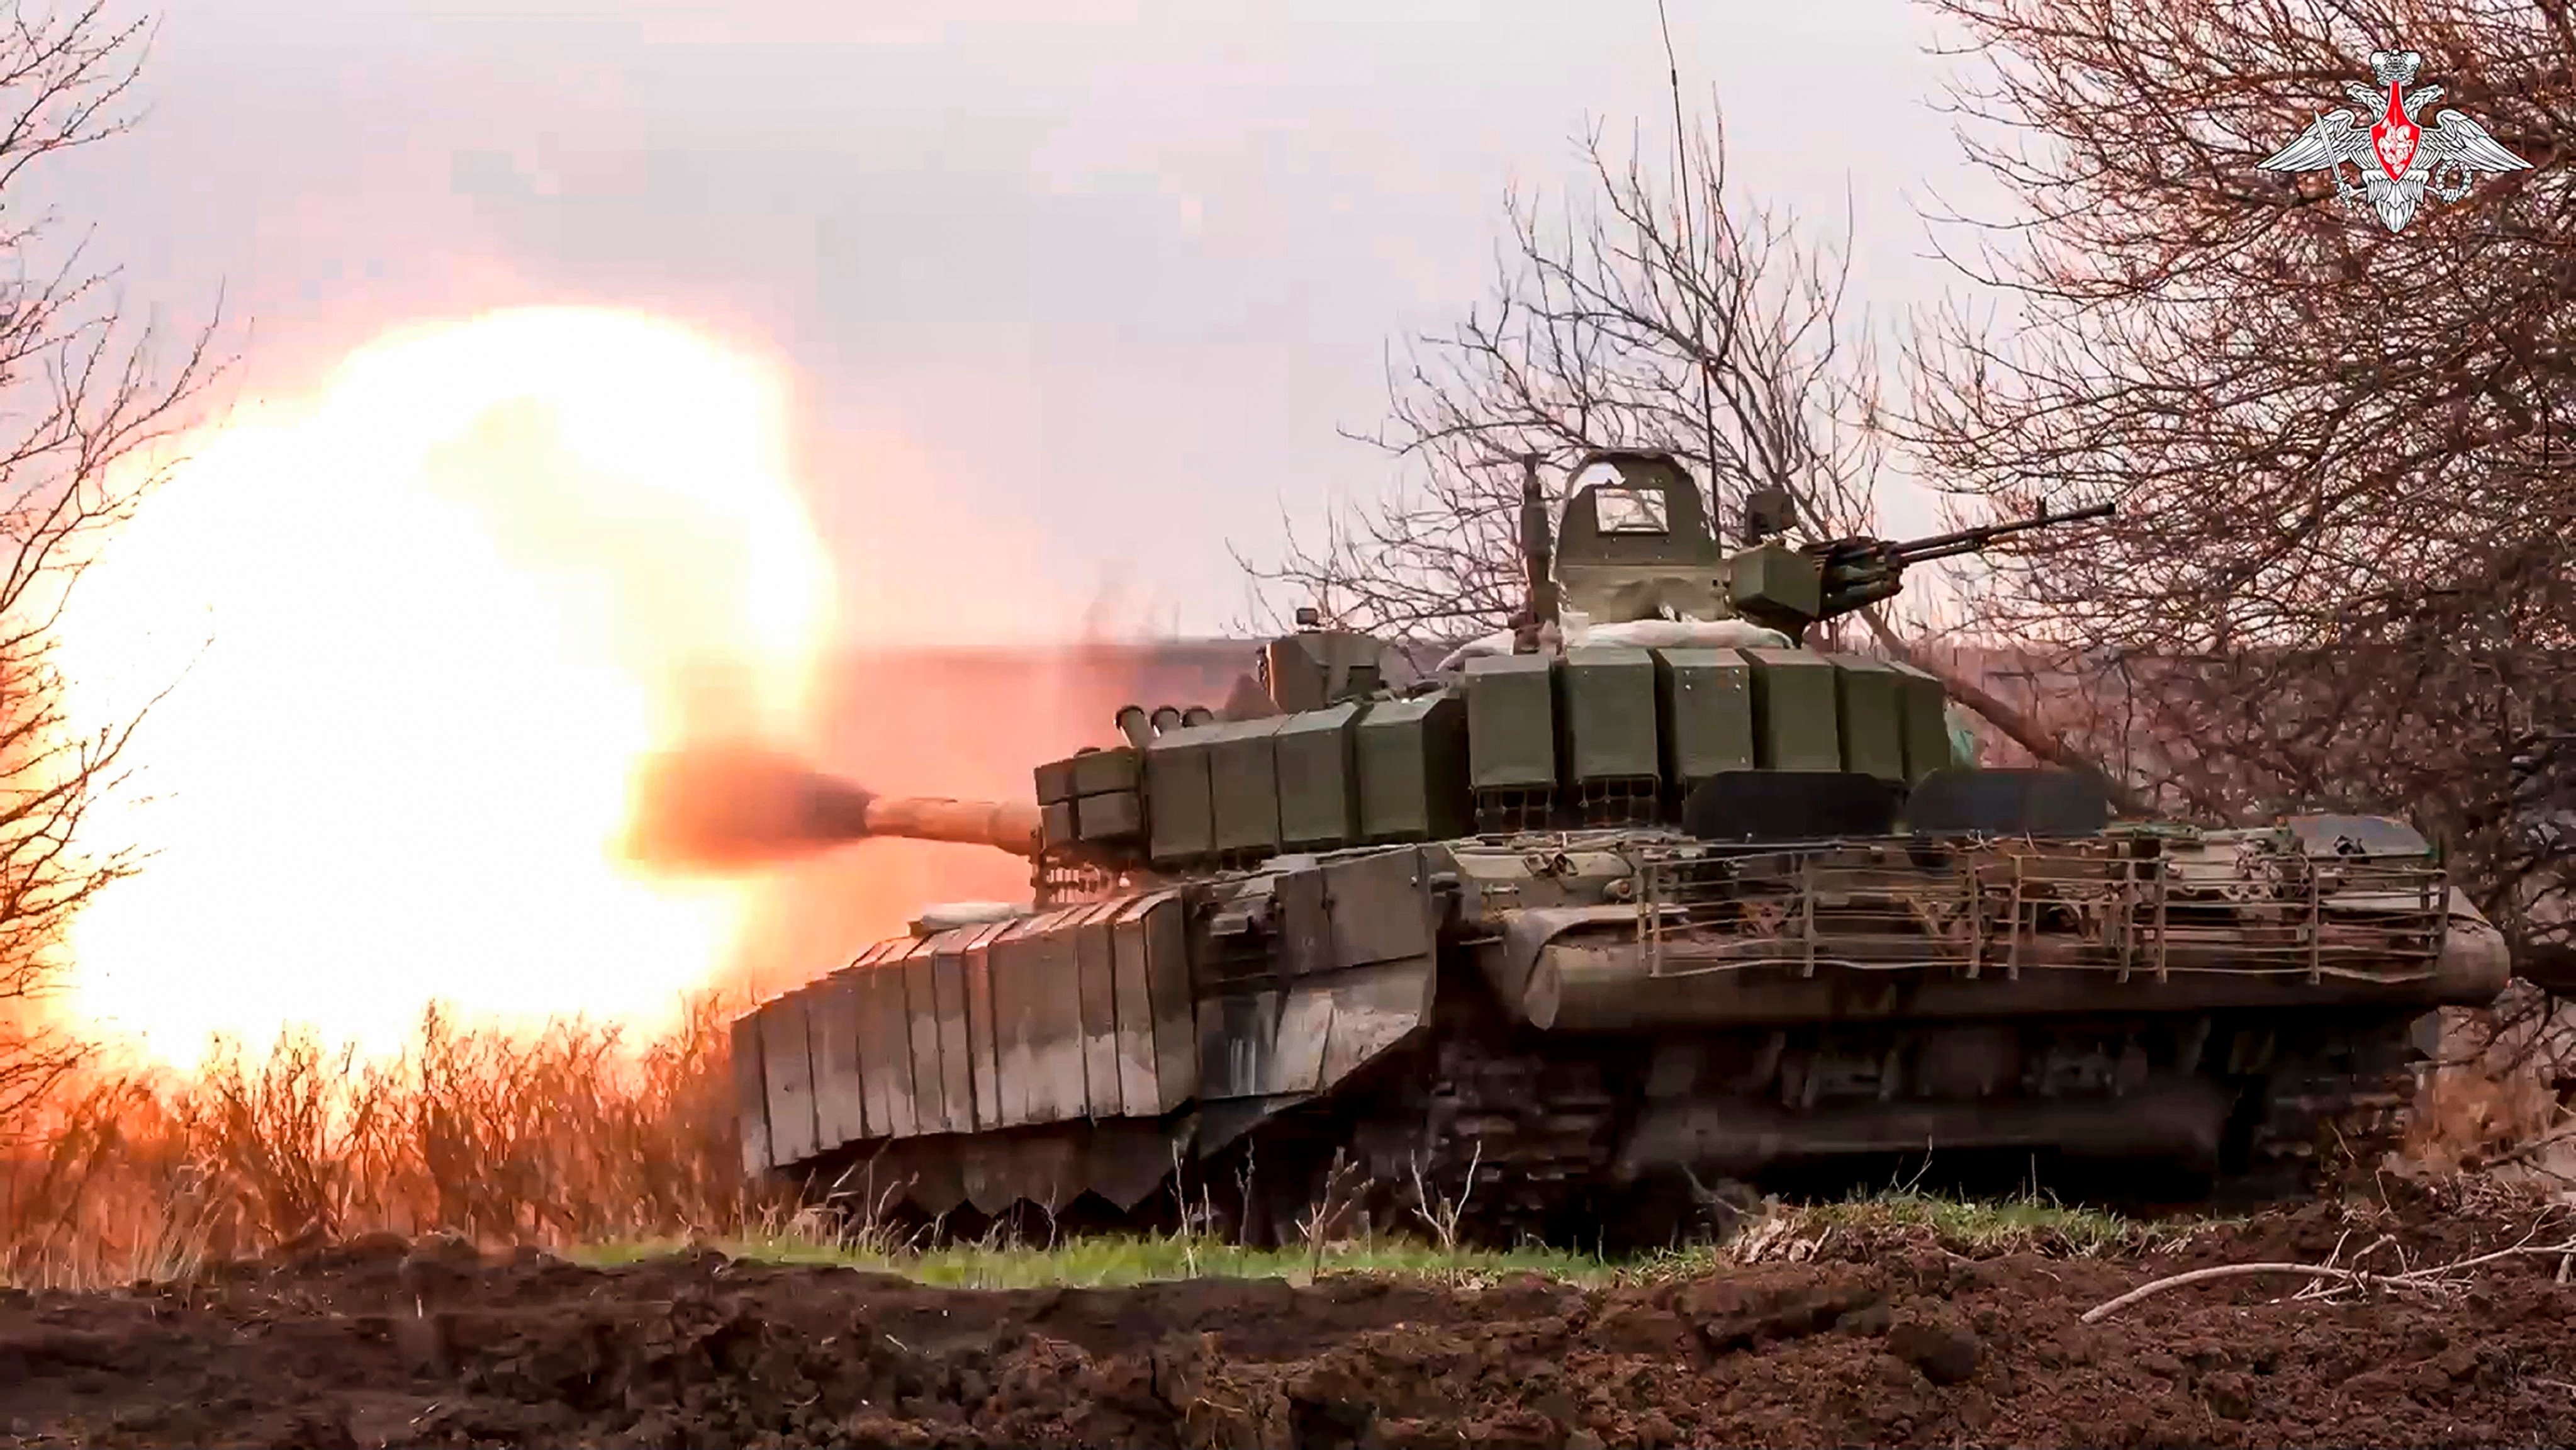 An image released in March shows a Russian tank firing at Ukrainian troops from a position in Russia’s Belgorod region. Photo: Russian Defence Ministry Press Service via AP